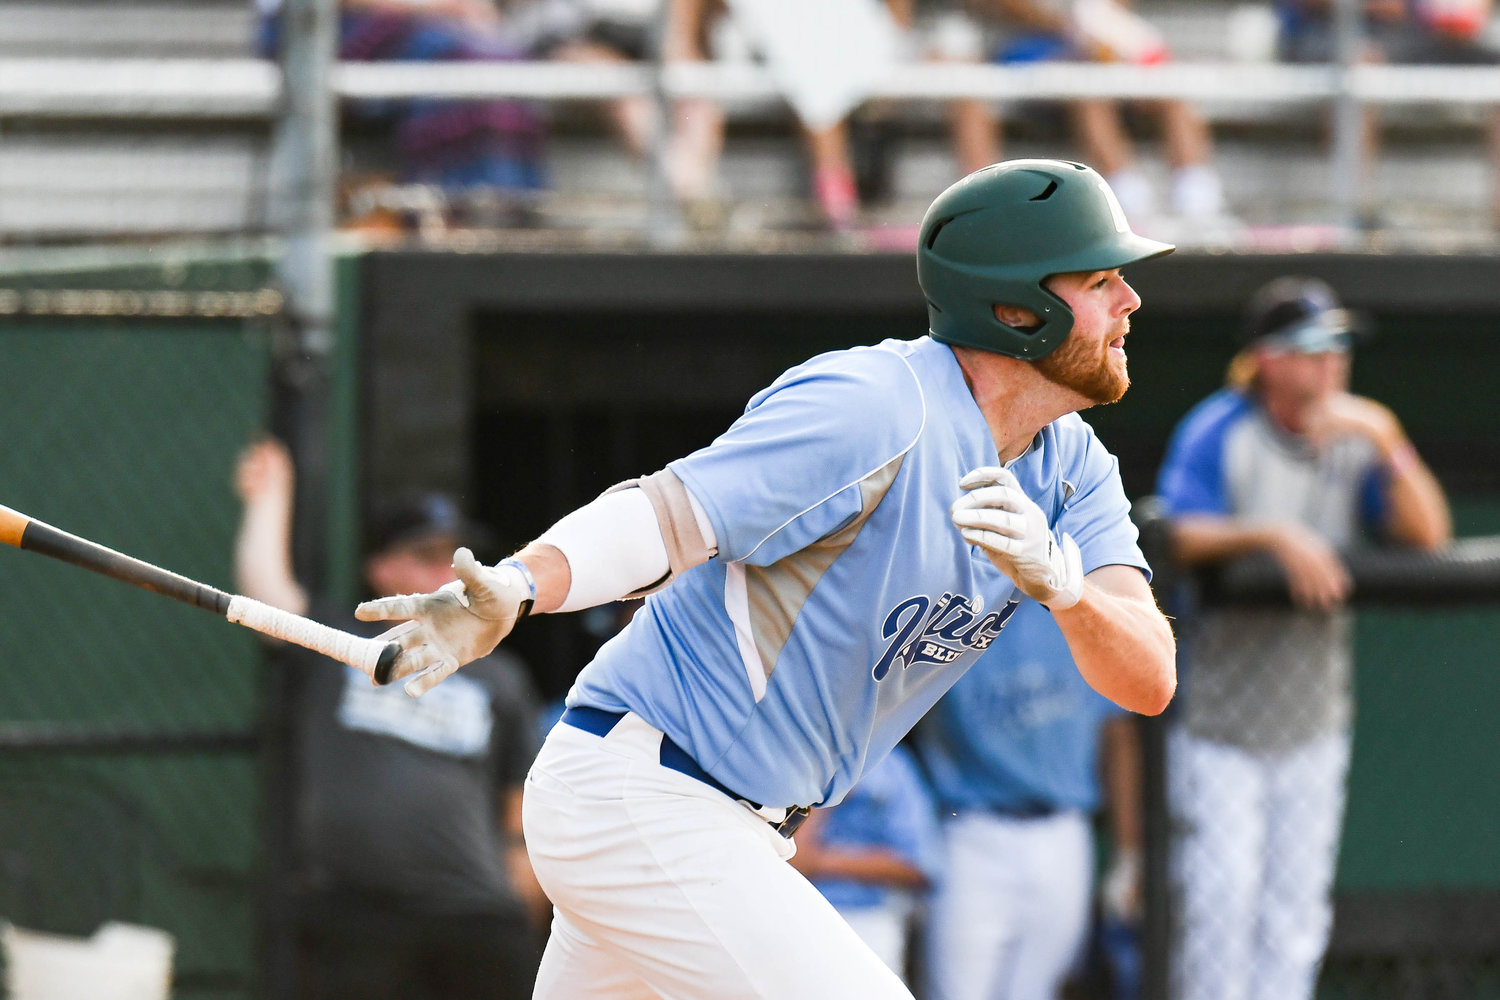 Dewey Roden, a Vernon-Verona-Sherrill grad, was one of the Utica Blue Sox top offensive players this summer. He was among the players named to the Perfect Game Collegiate Baseball League’s First Team.